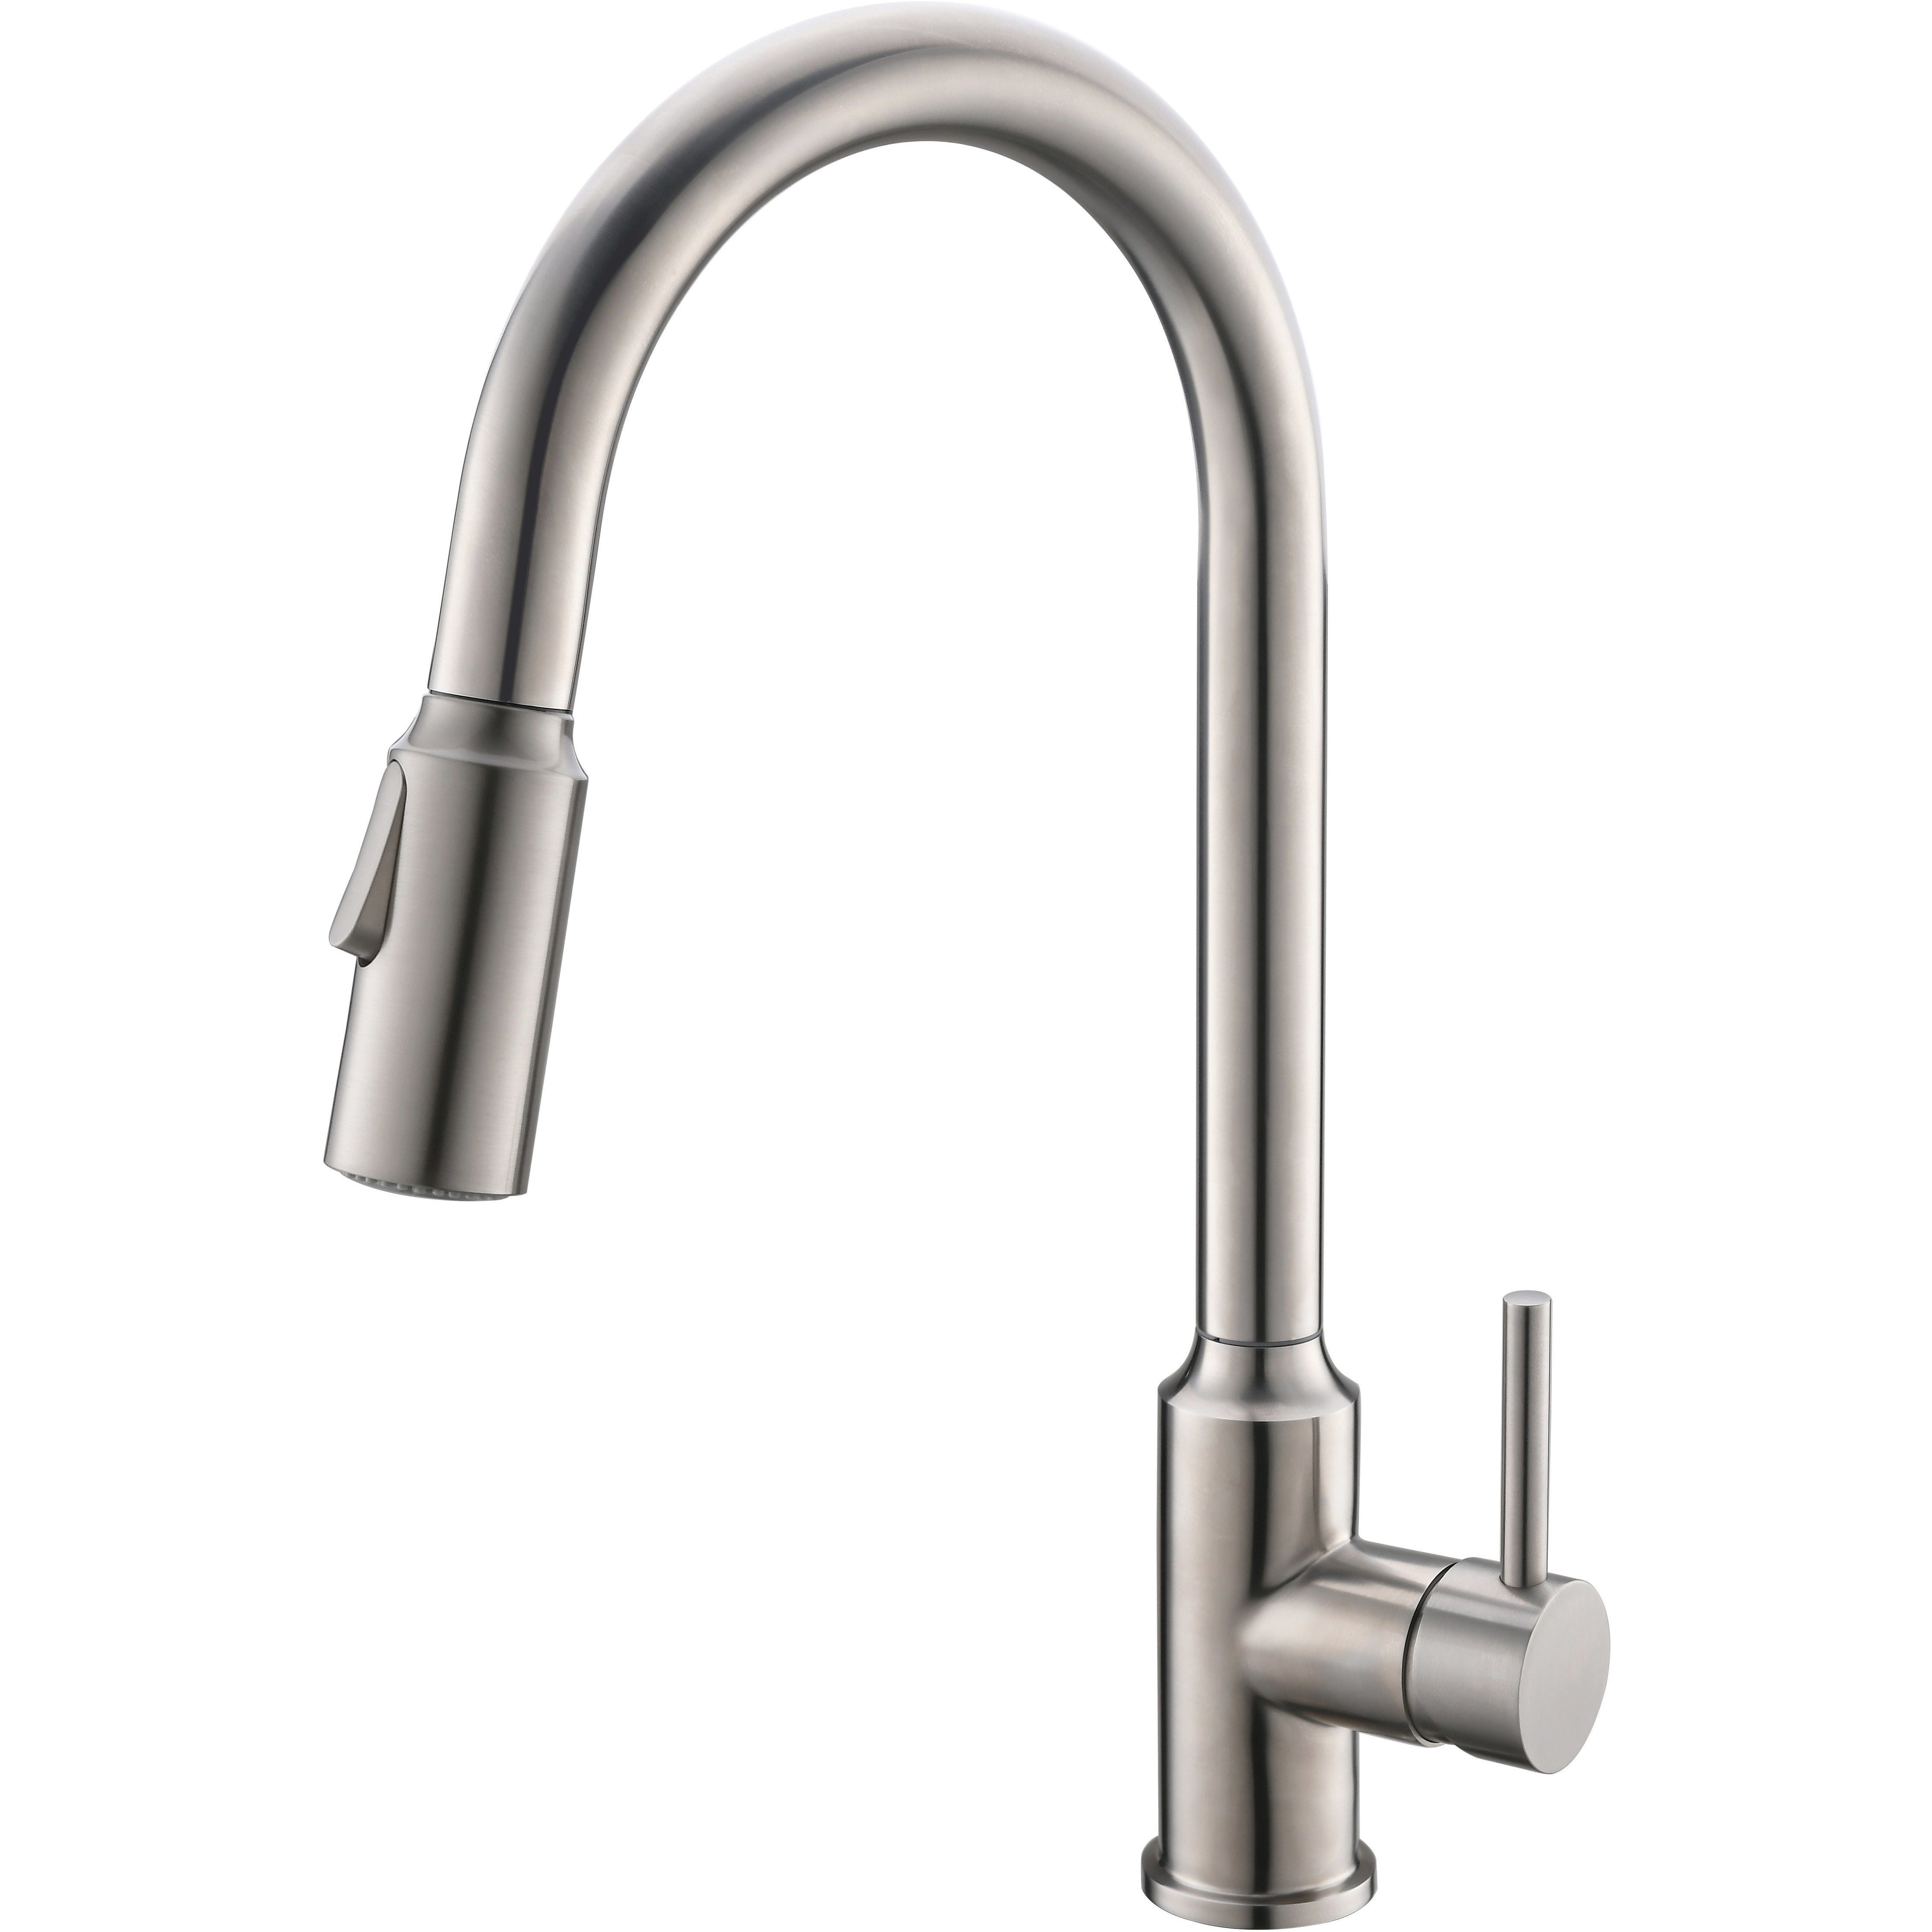 Magnolia Pull Down Single Handle Kitchen Faucet